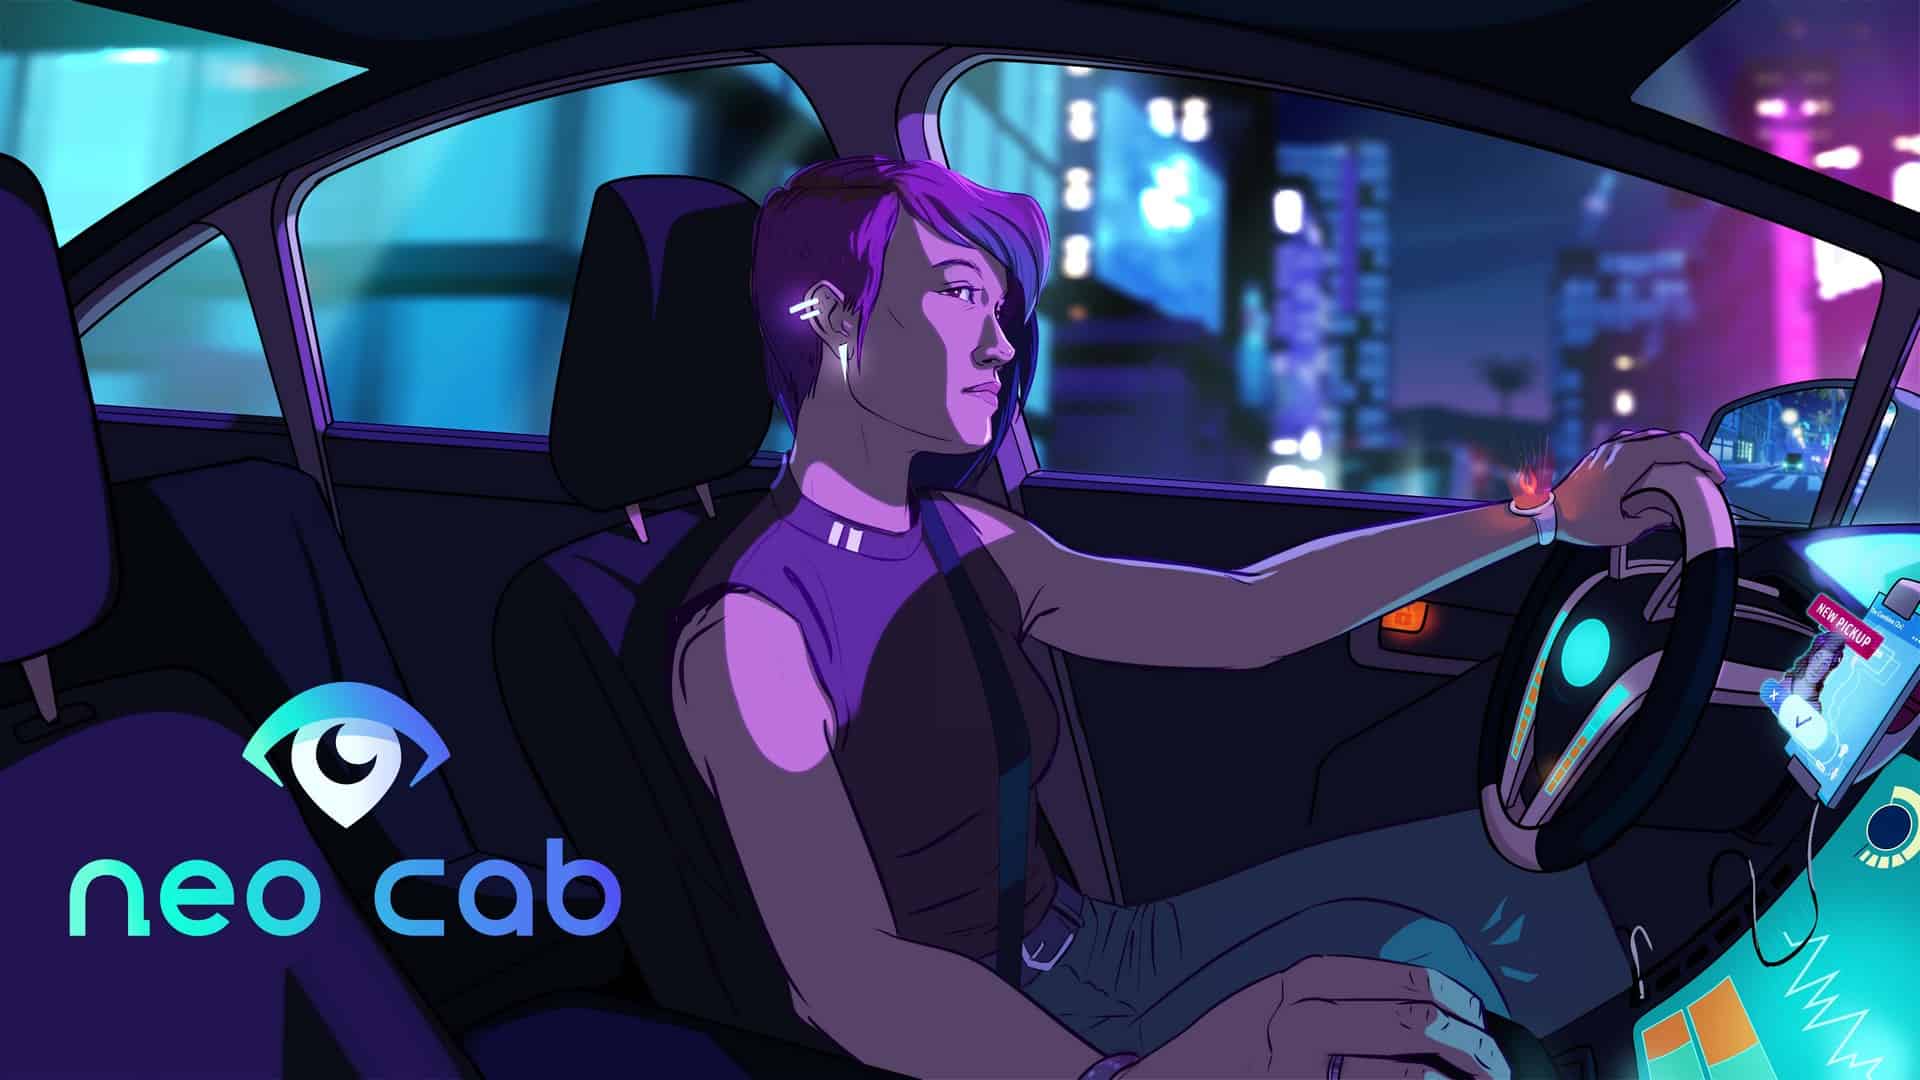 Neo Cab, The Cyberpunk Rideshare Adventure Of The Future Is Now Available On PC/Mac & Nintendo Switch